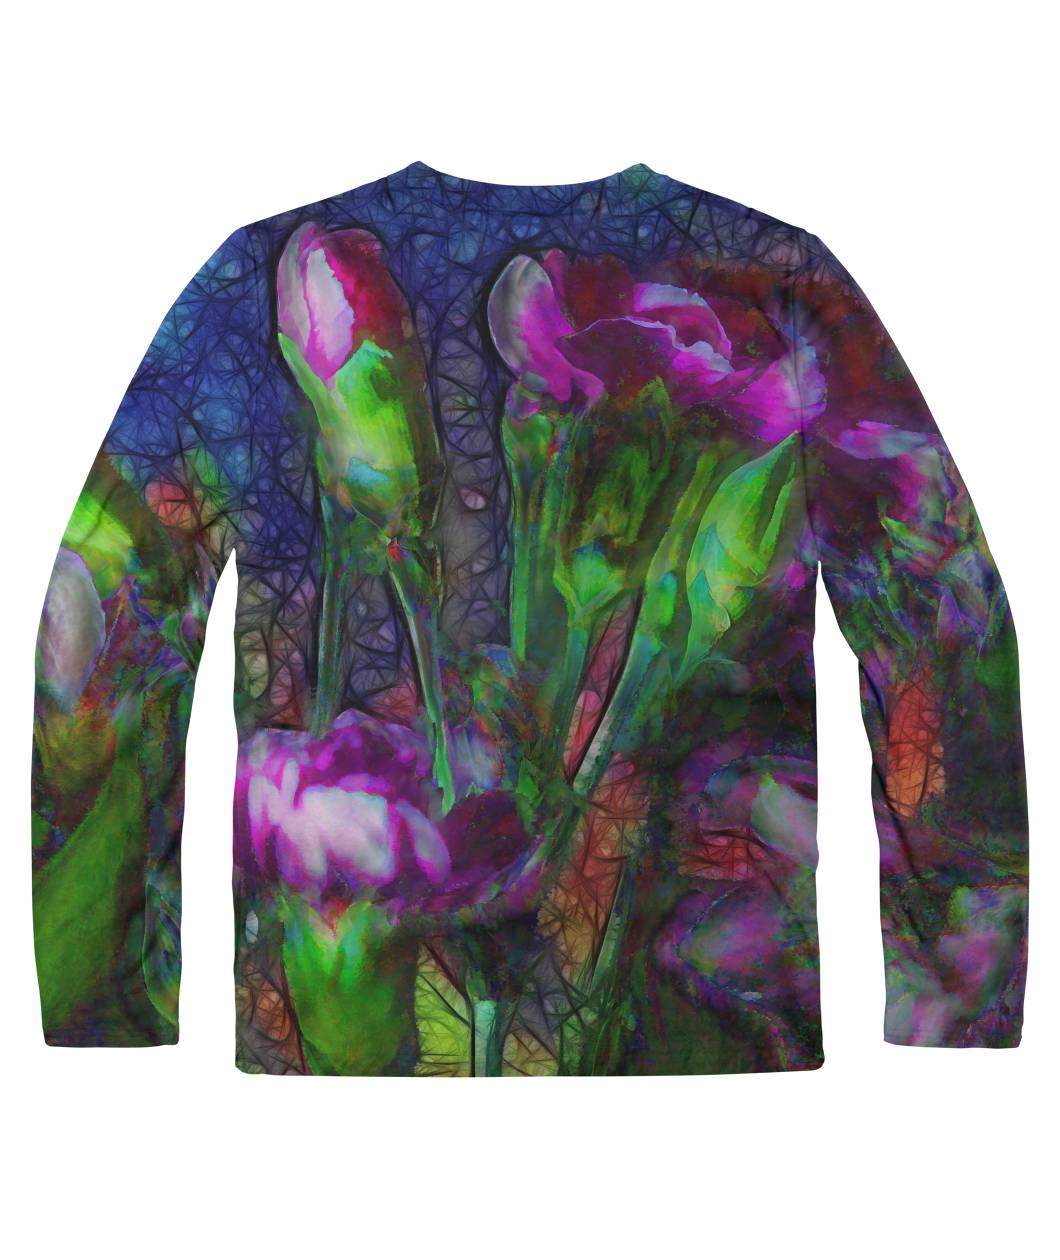 Abstract Pink Carnations Longsleeve Sublimation Long Sleeve